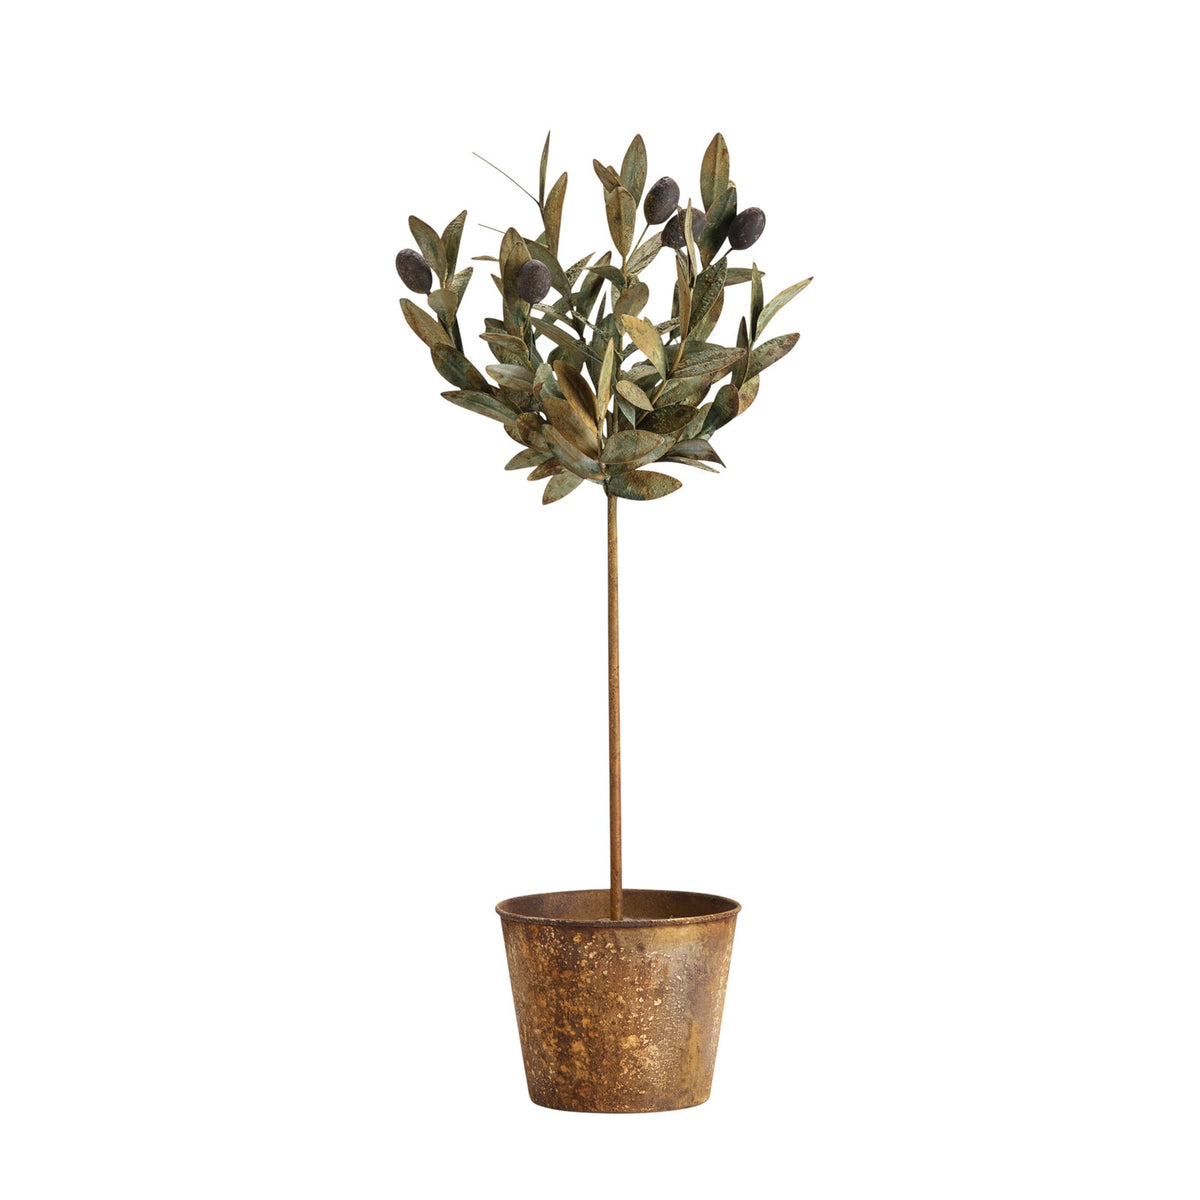 METAL OLIVE TOPIARY TOLE IN POT